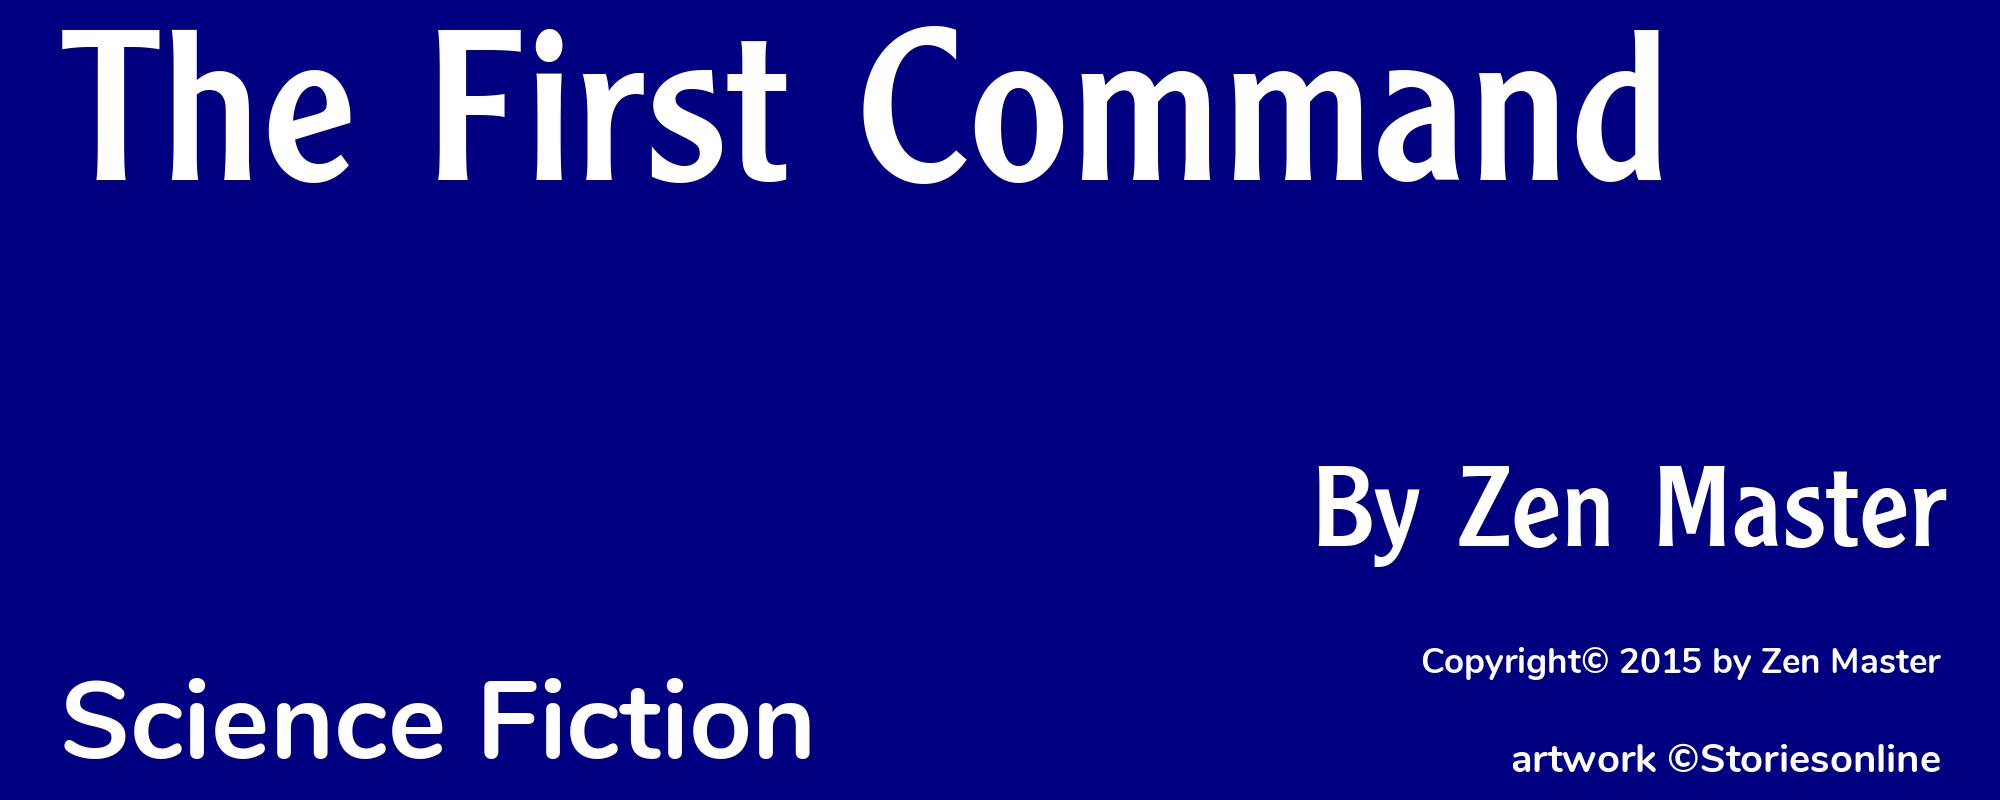 The First Command - Cover